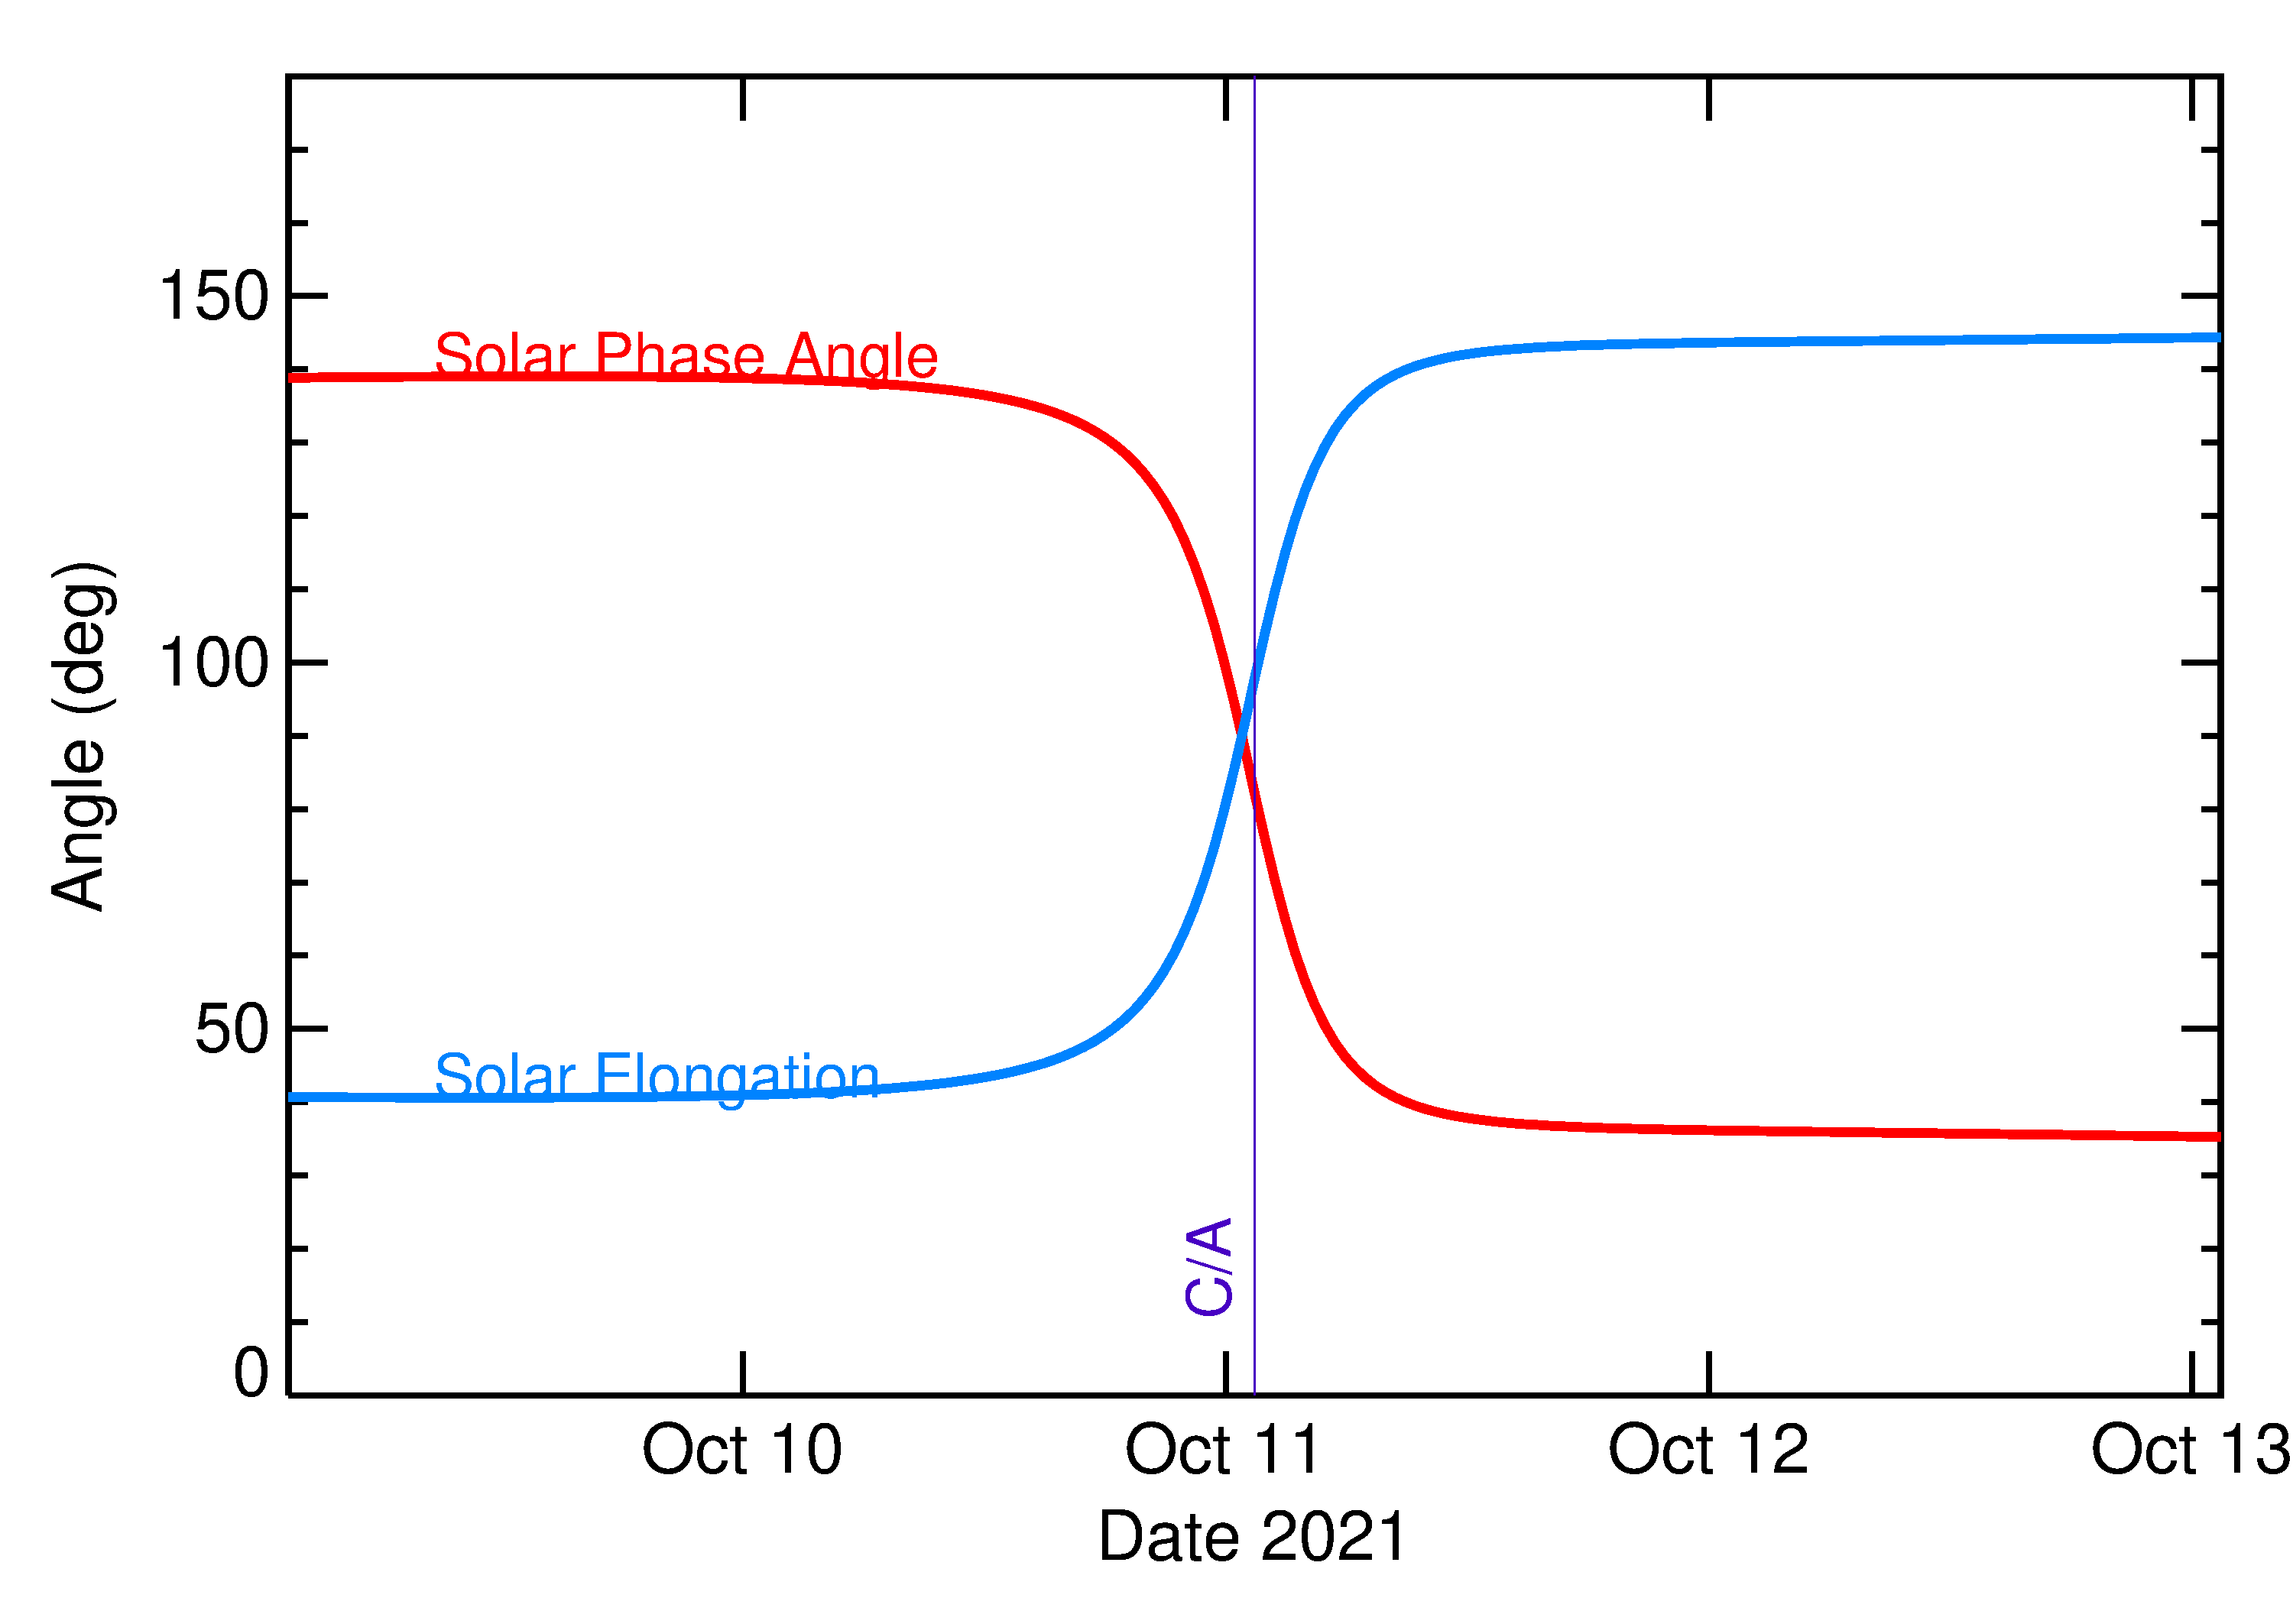 Solar Elongation and Solar Phase Angle of 2021 TK11 in the days around closest approach